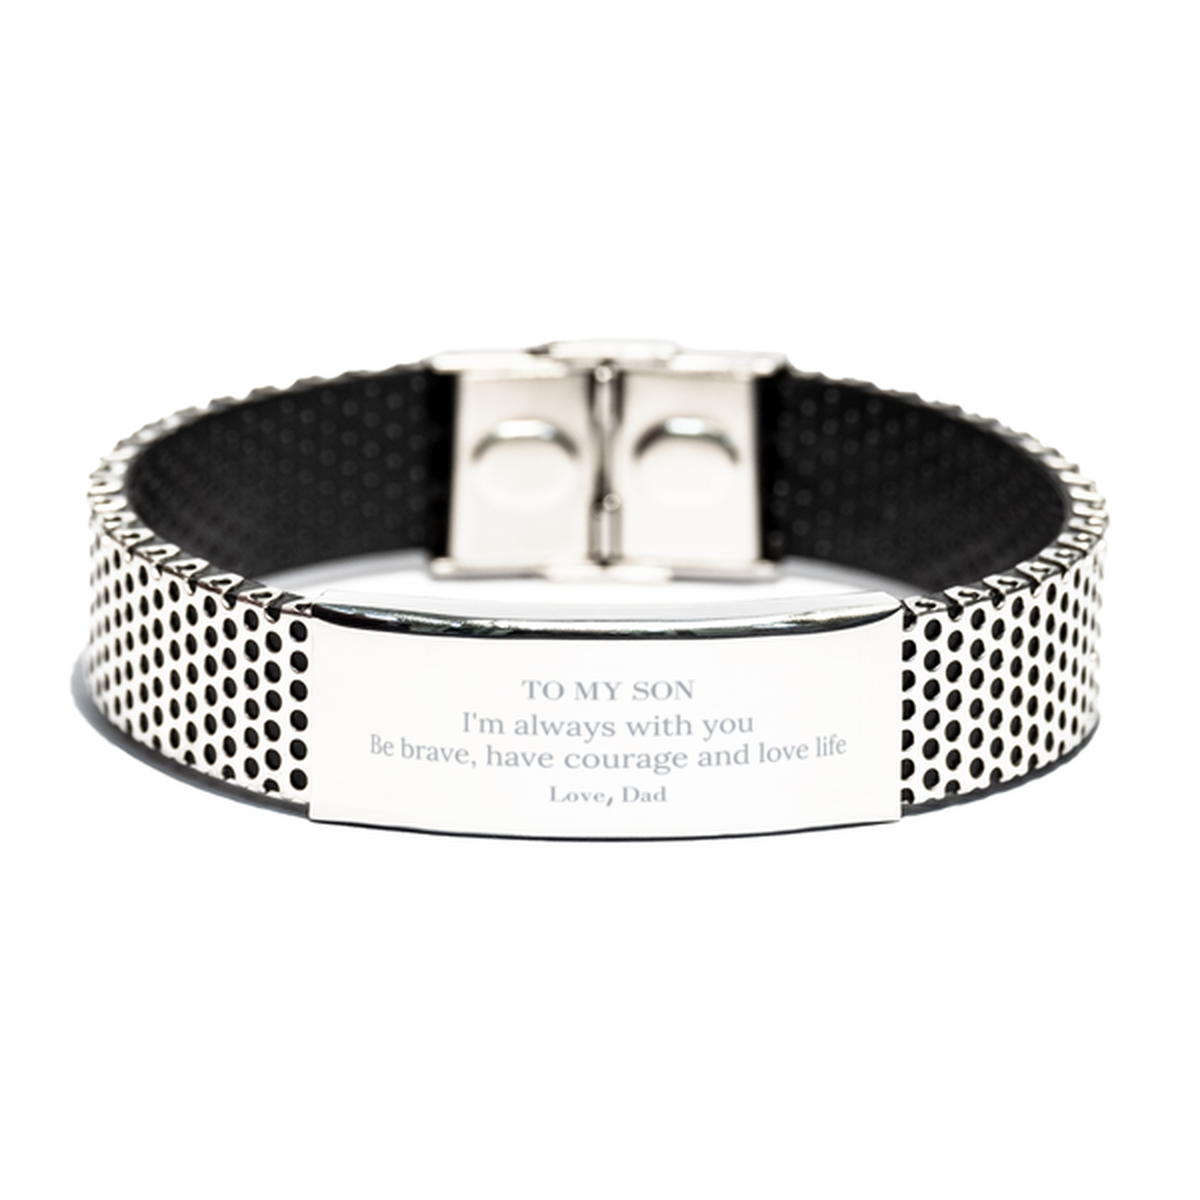 To My Son Gifts from Dad, Unique Stainless Steel Bracelet Inspirational Christmas Birthday Graduation Gifts for Son I'm always with you. Be brave, have courage and love life. Love, Dad